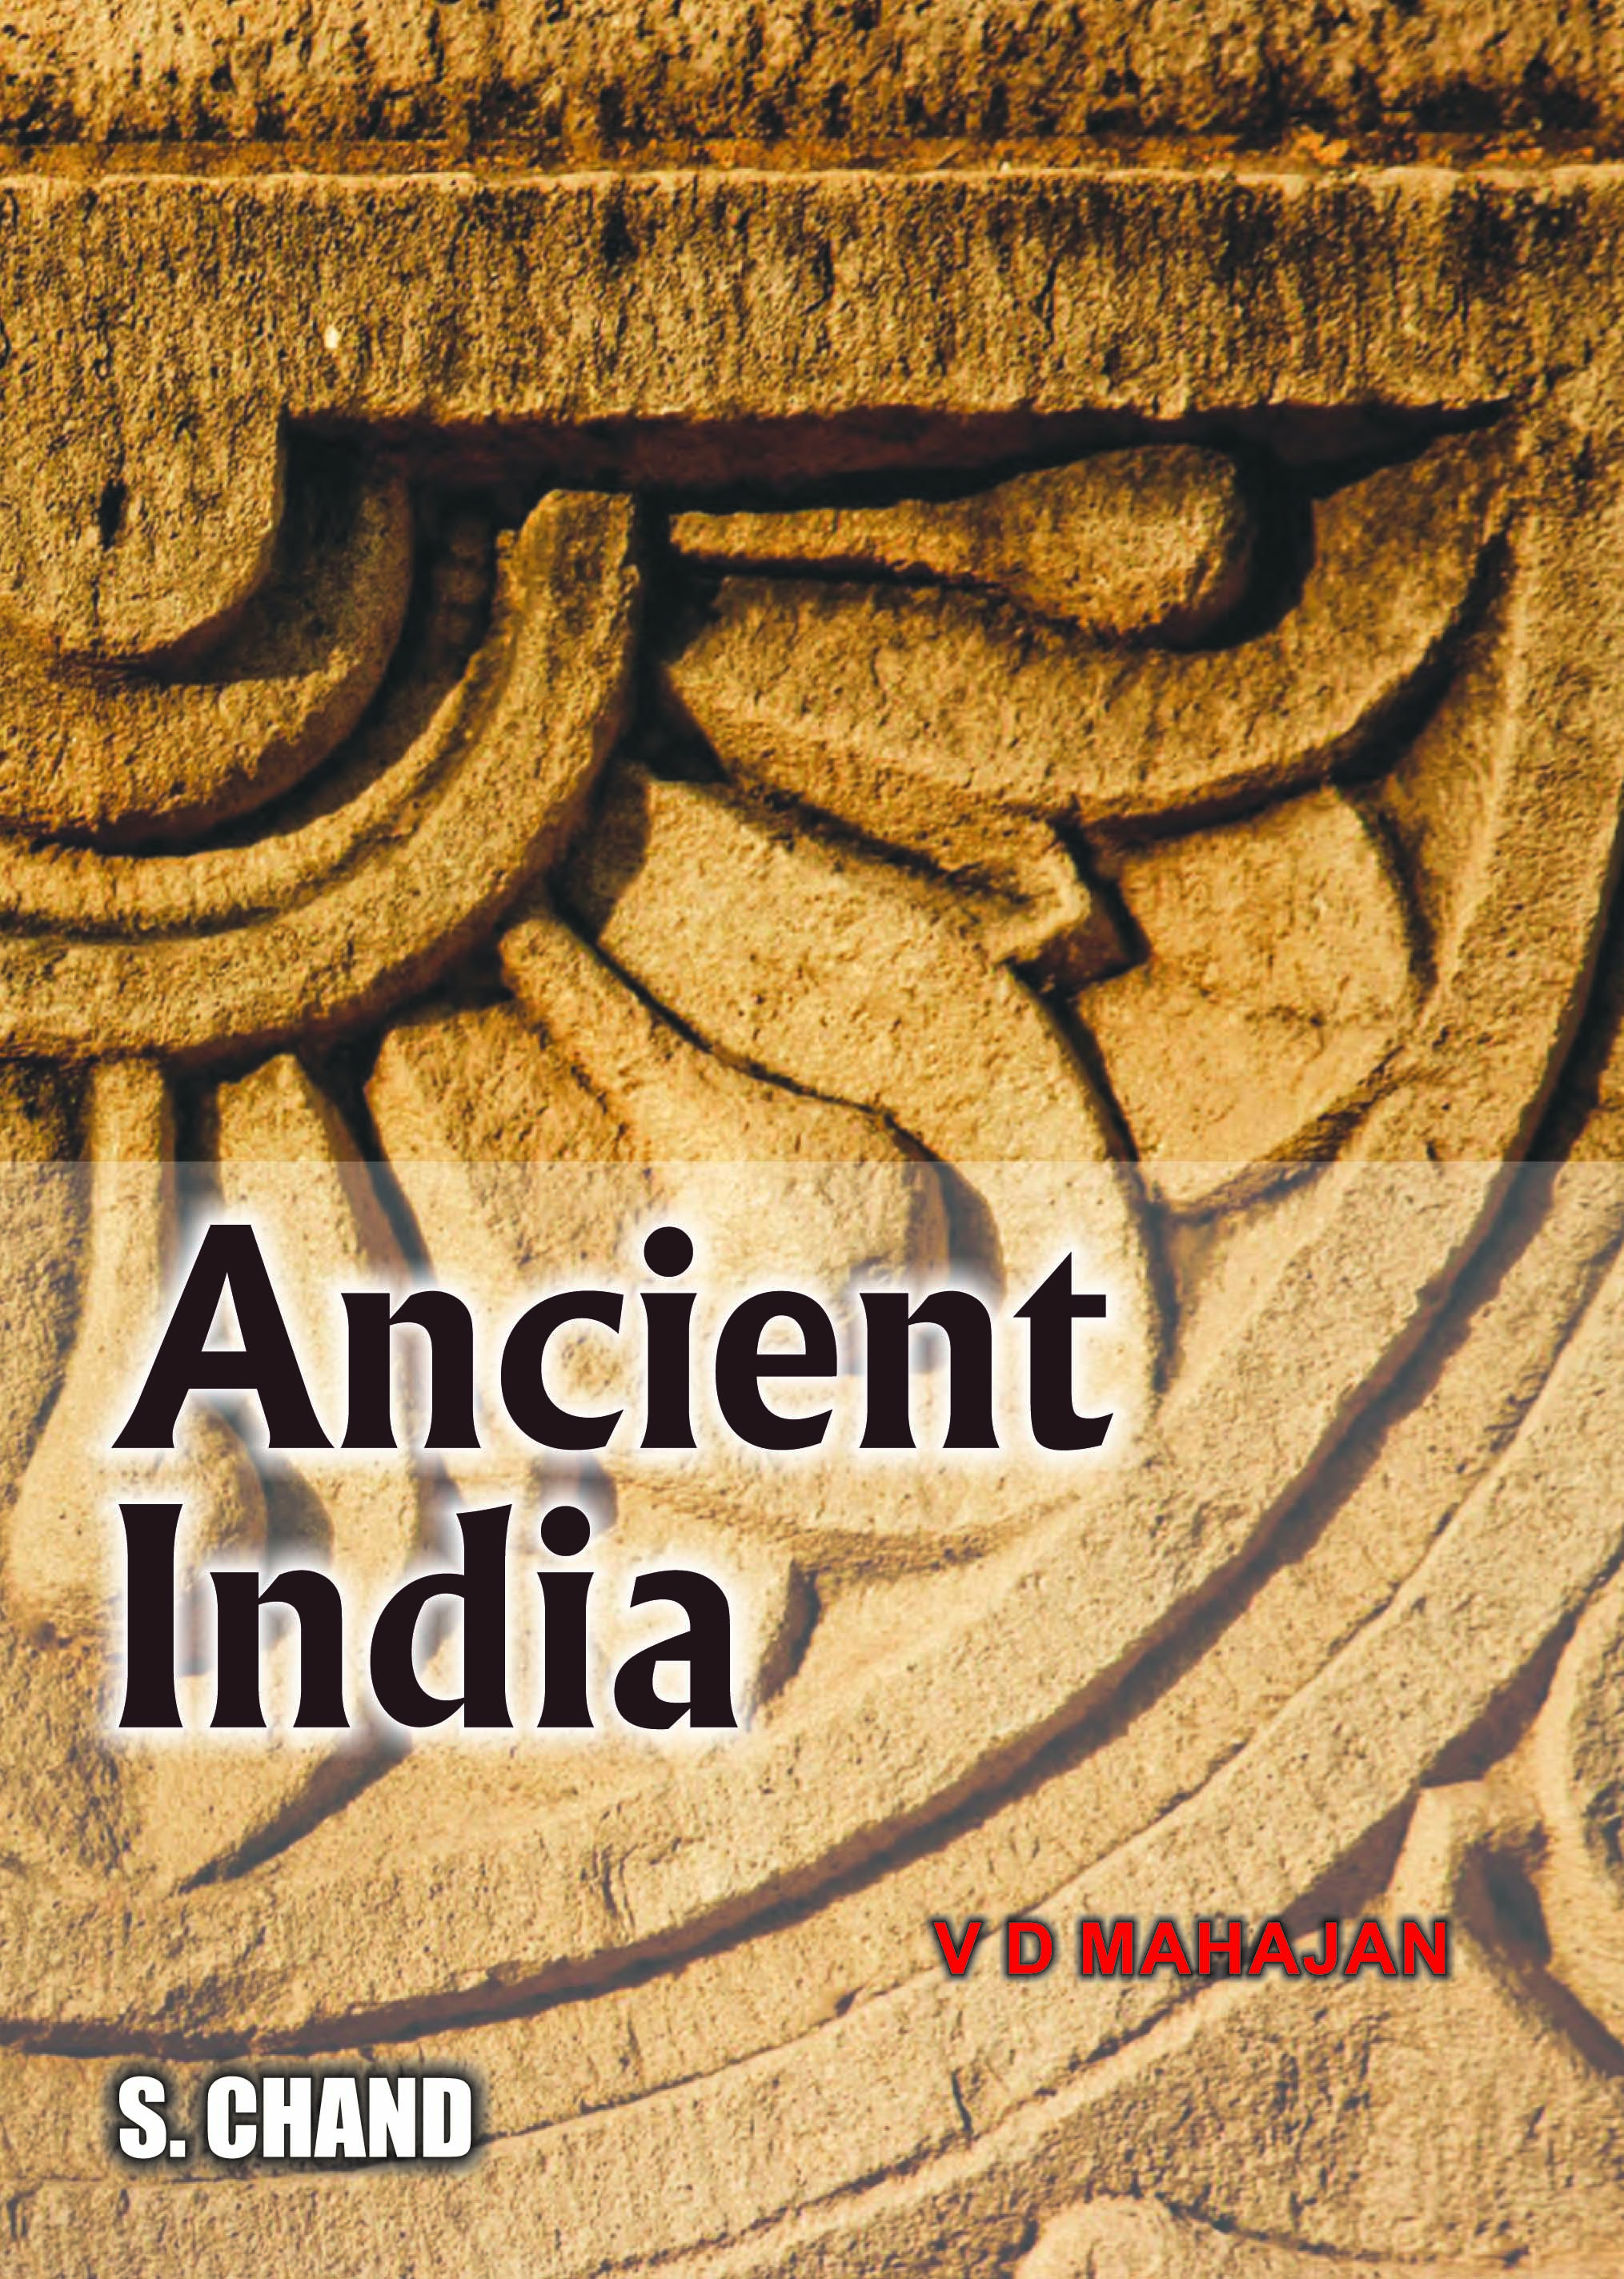 A List of 25 Interesting Facts About Ancient India - 9789352531325